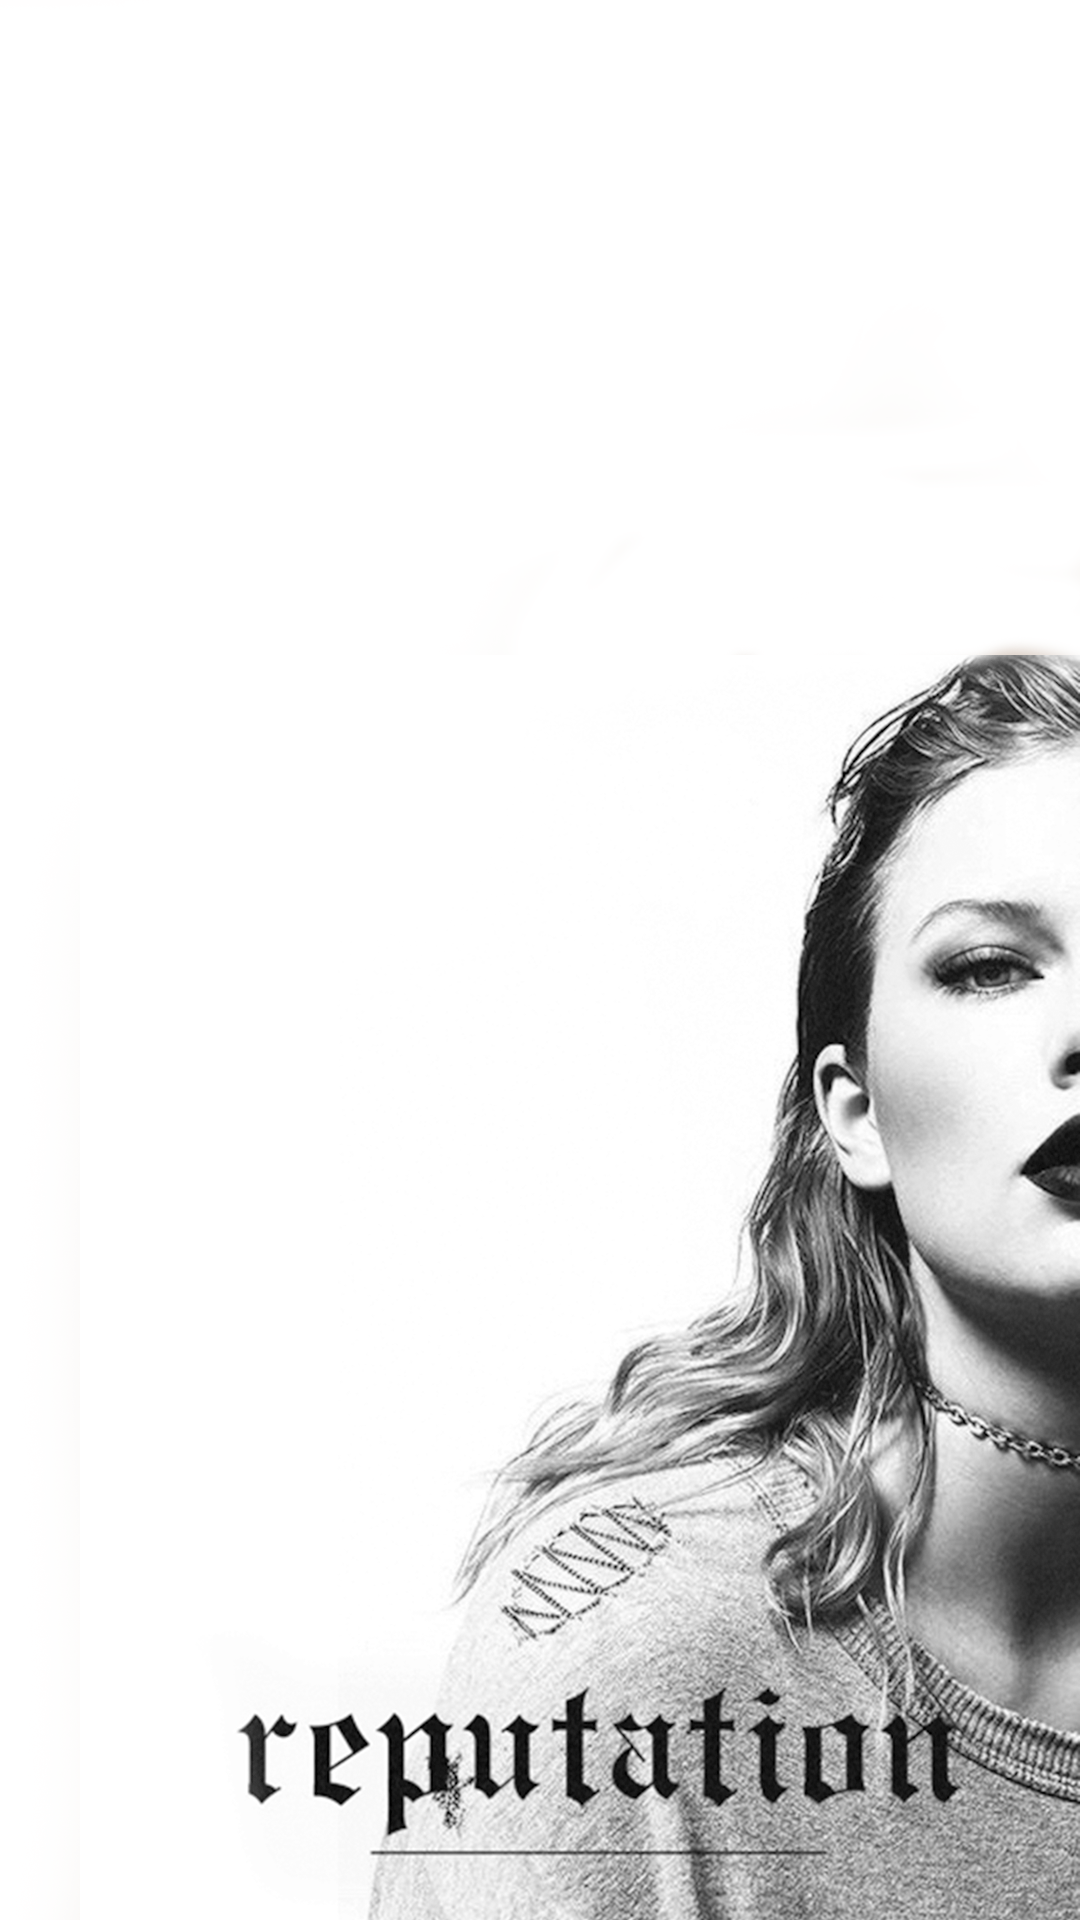 Image Result For Taylor Swift Reputation Wallpaper In